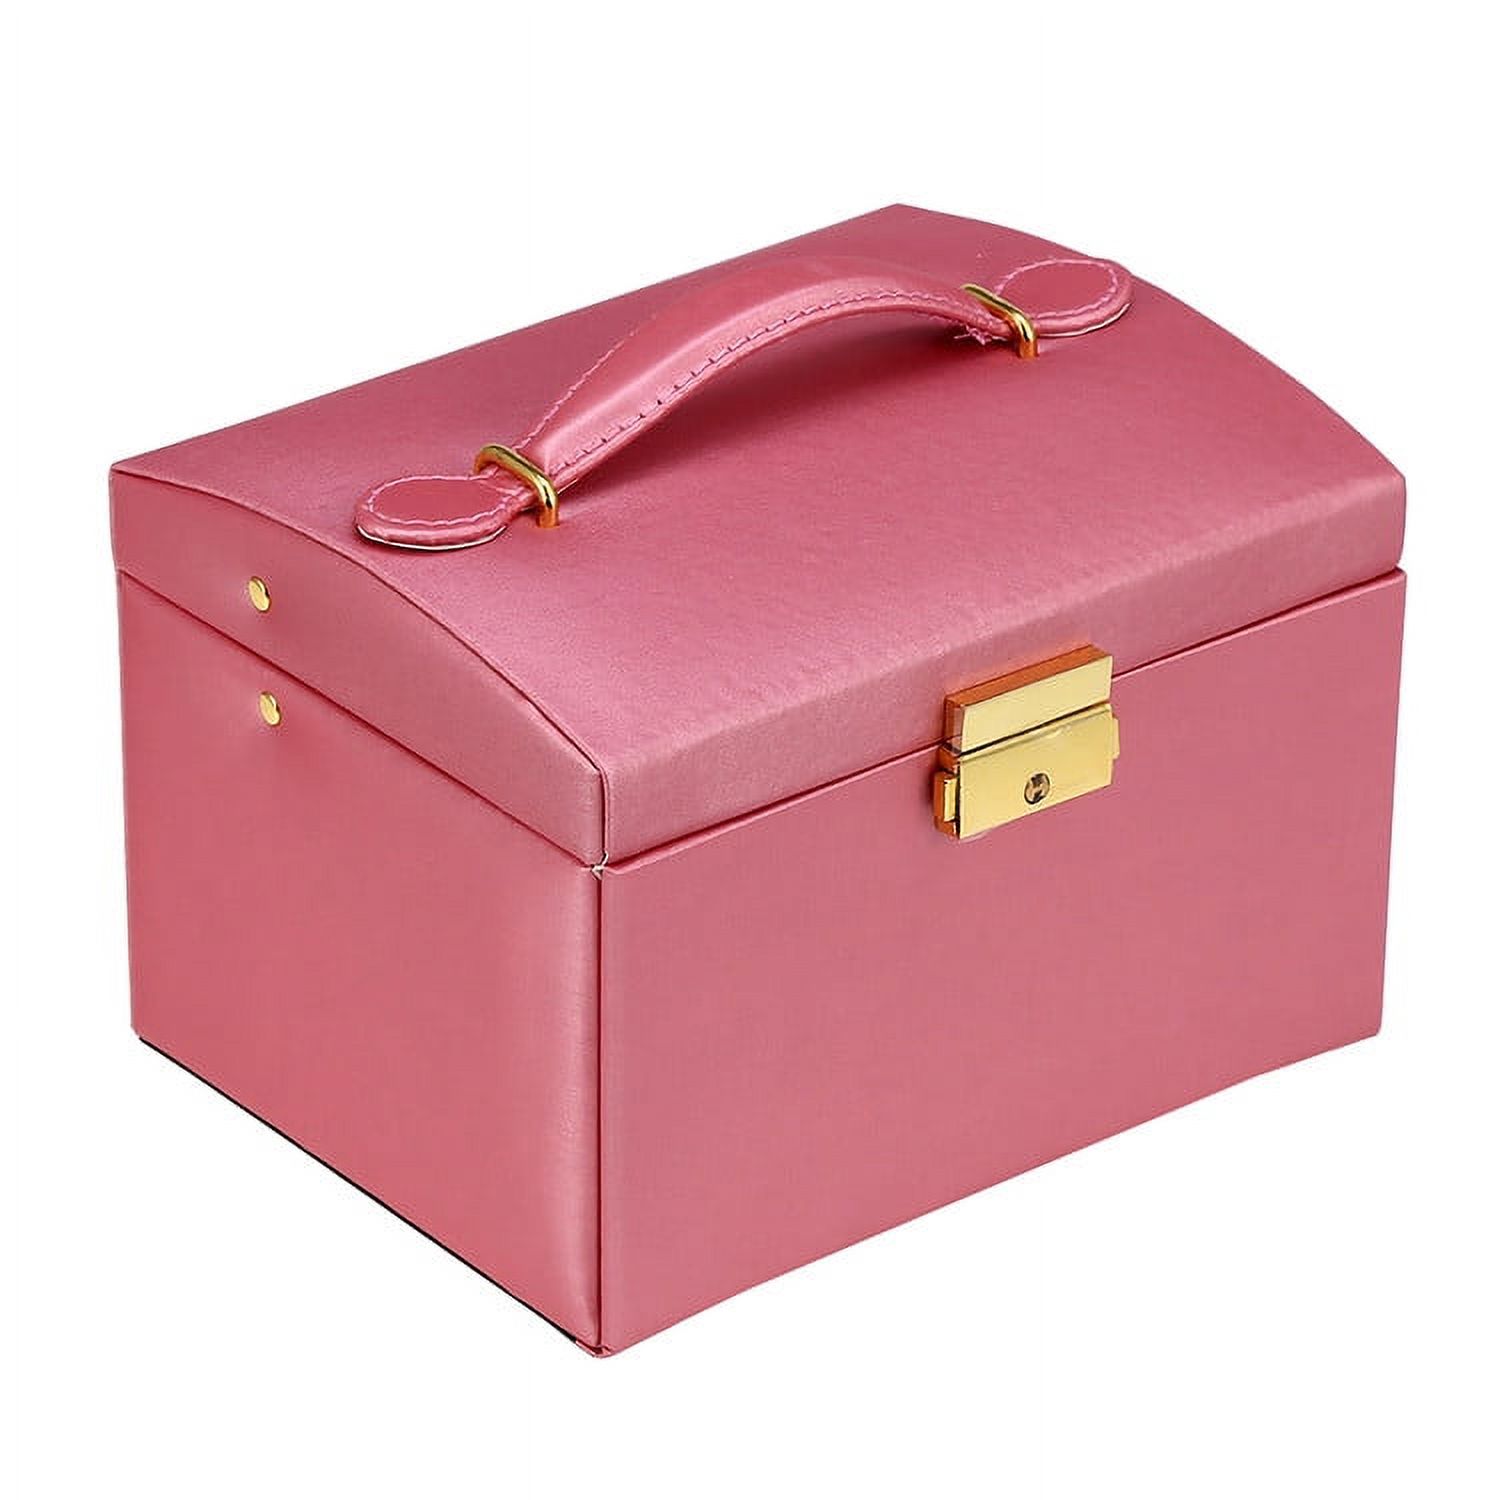 Walfront 3-Layer Girls Leather Jewelry Box and Watch Organizers, Lockable, Mirror, Pink - image 2 of 4